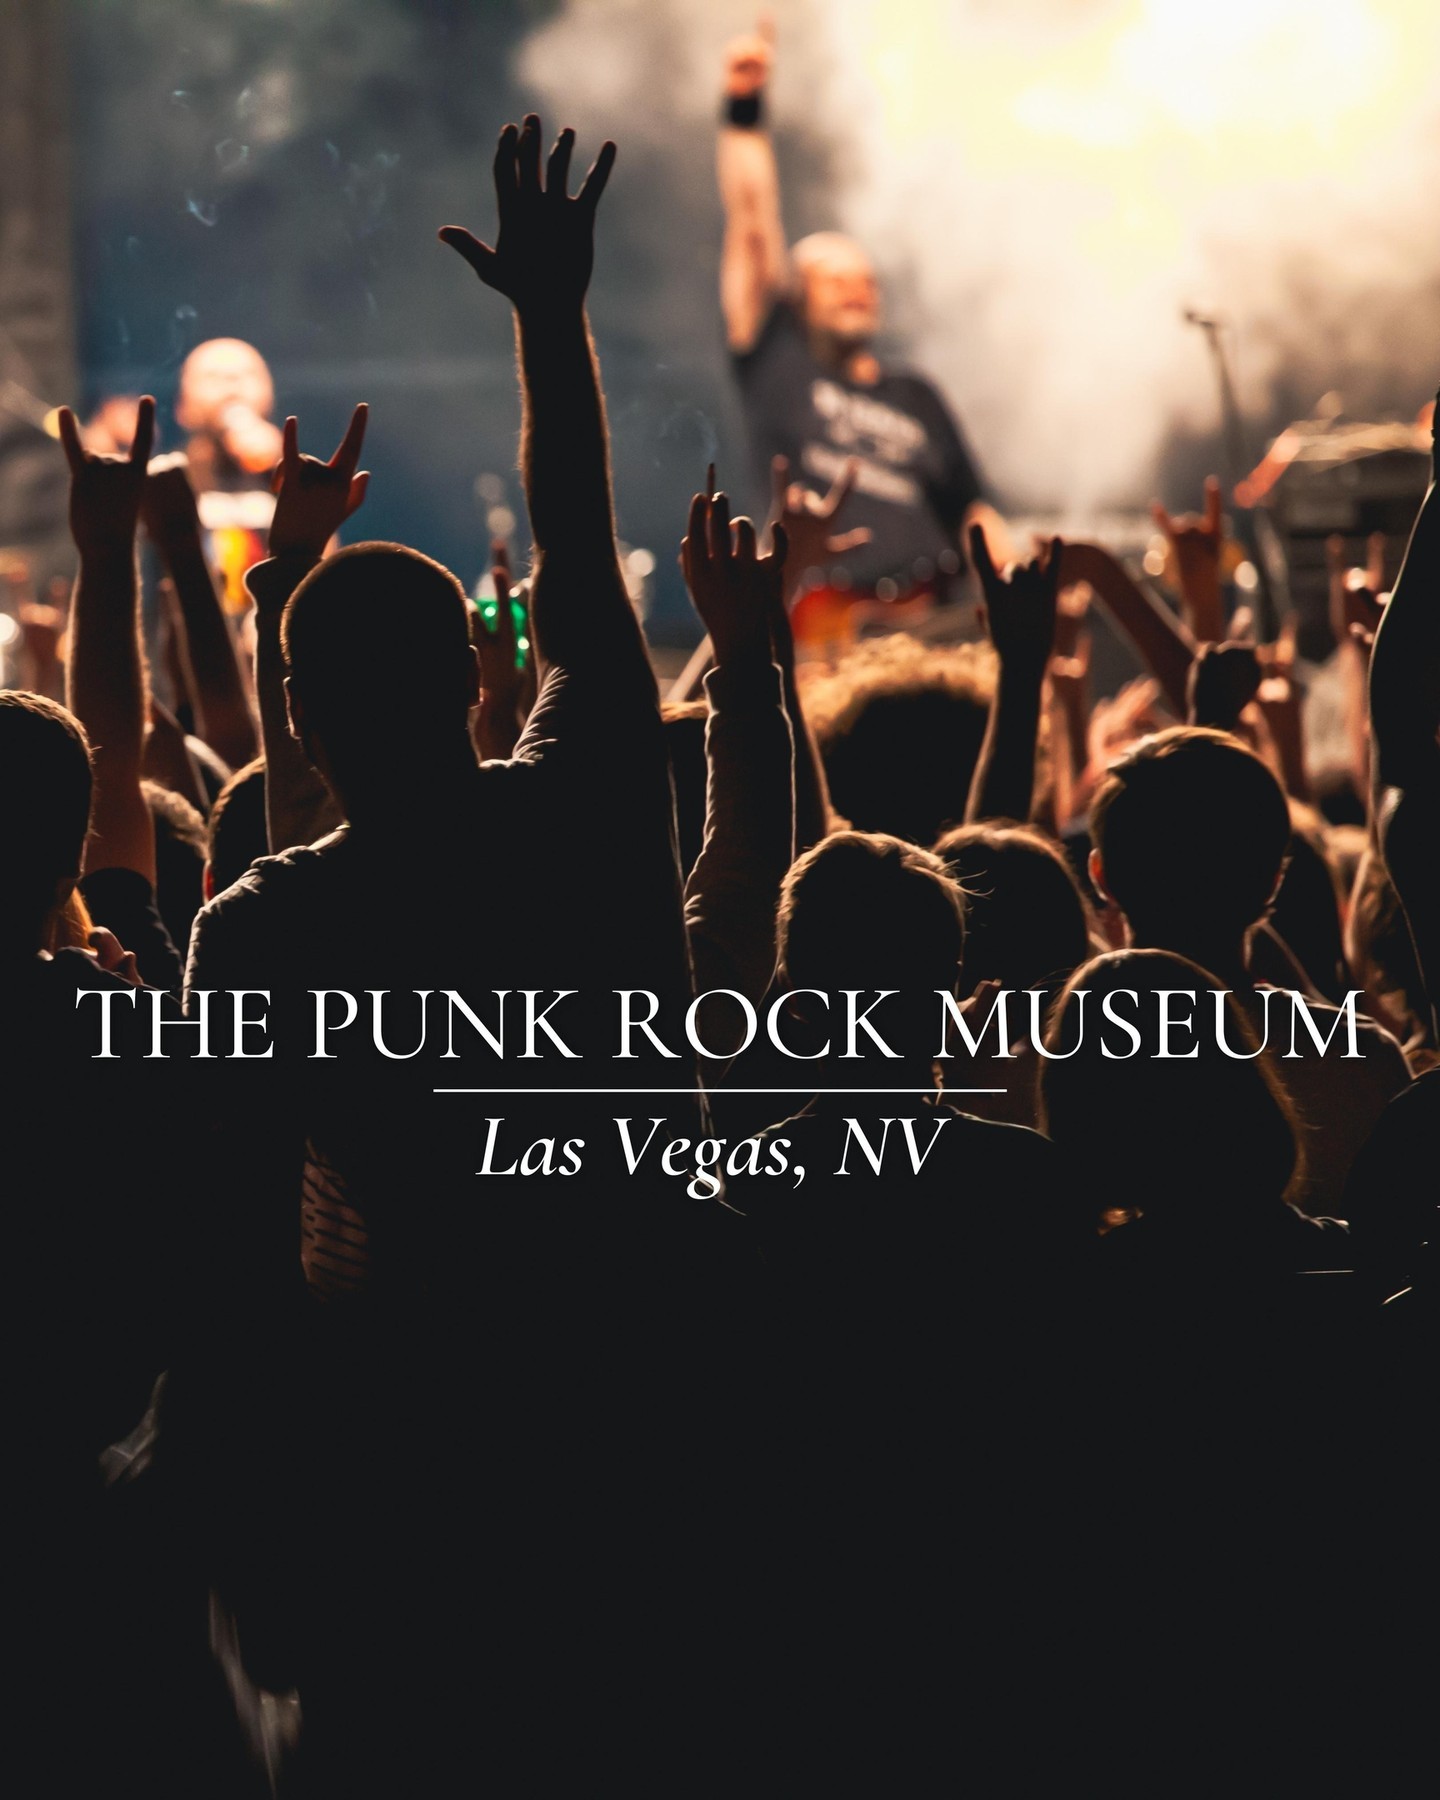 COMING TO LAS VEGAS JANUARY 13: @thepunkrockmuseum 🎸 This will be the largest attraction in the world devoted to the background, culture and absolute absurdity of the punk rock scene. Not only will the massive 12,000 square foot space feature relics and memorabilia from the global punk movement, but also a full bar, tattoo parlor, wedding chapel, merch shop, performance space and much more. Visit the link in our bio to read more! 🤘